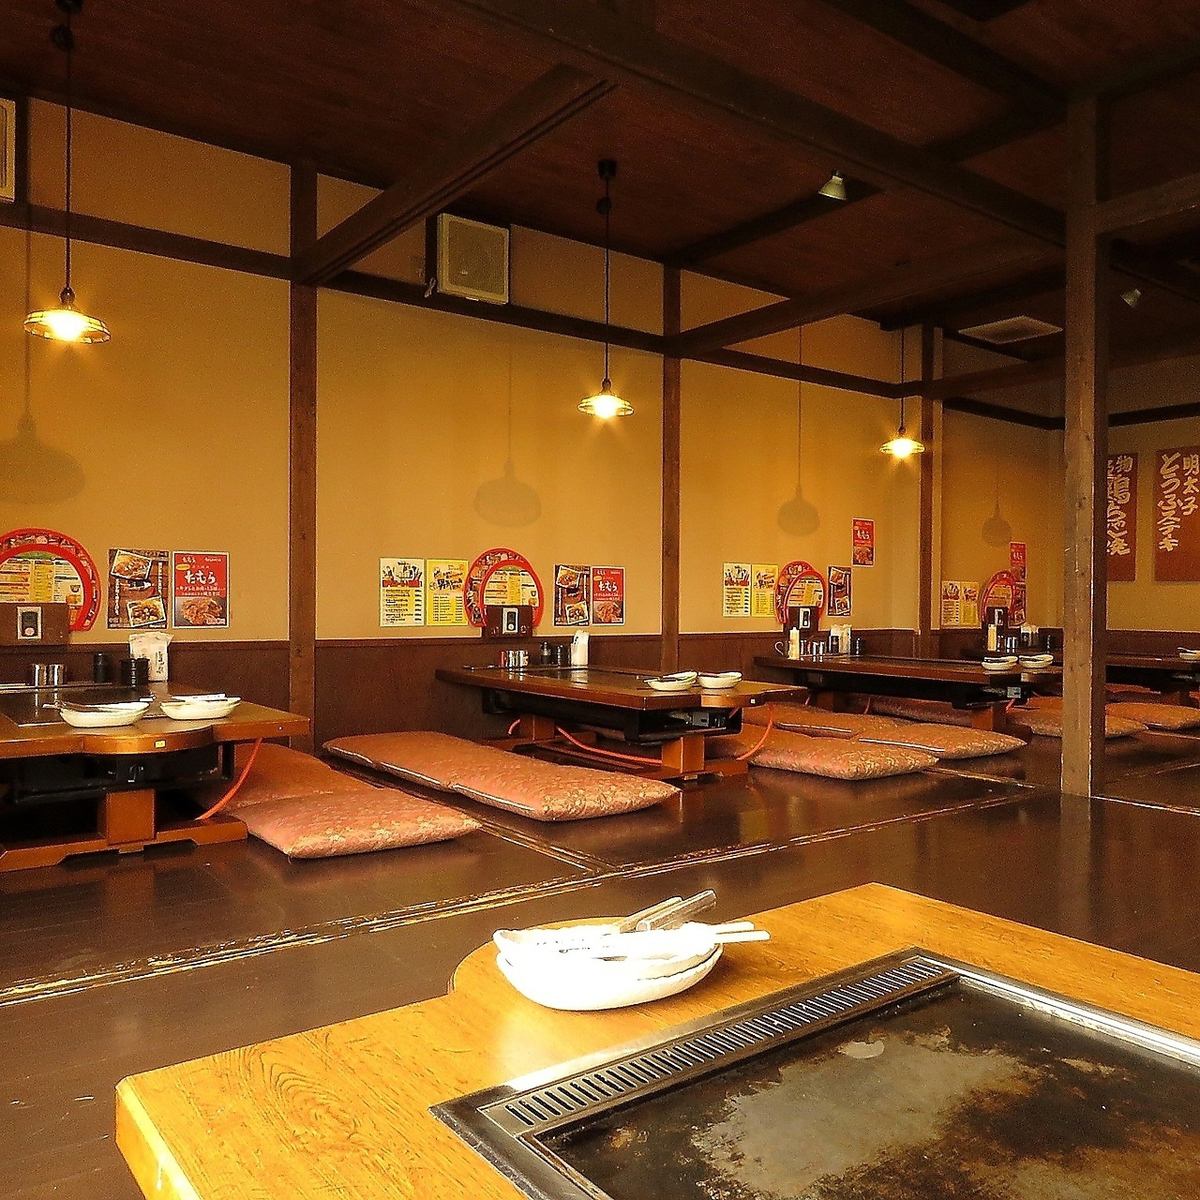 There is also a tatami room, so it's safe for small children ☆ The wide menu is also attractive!